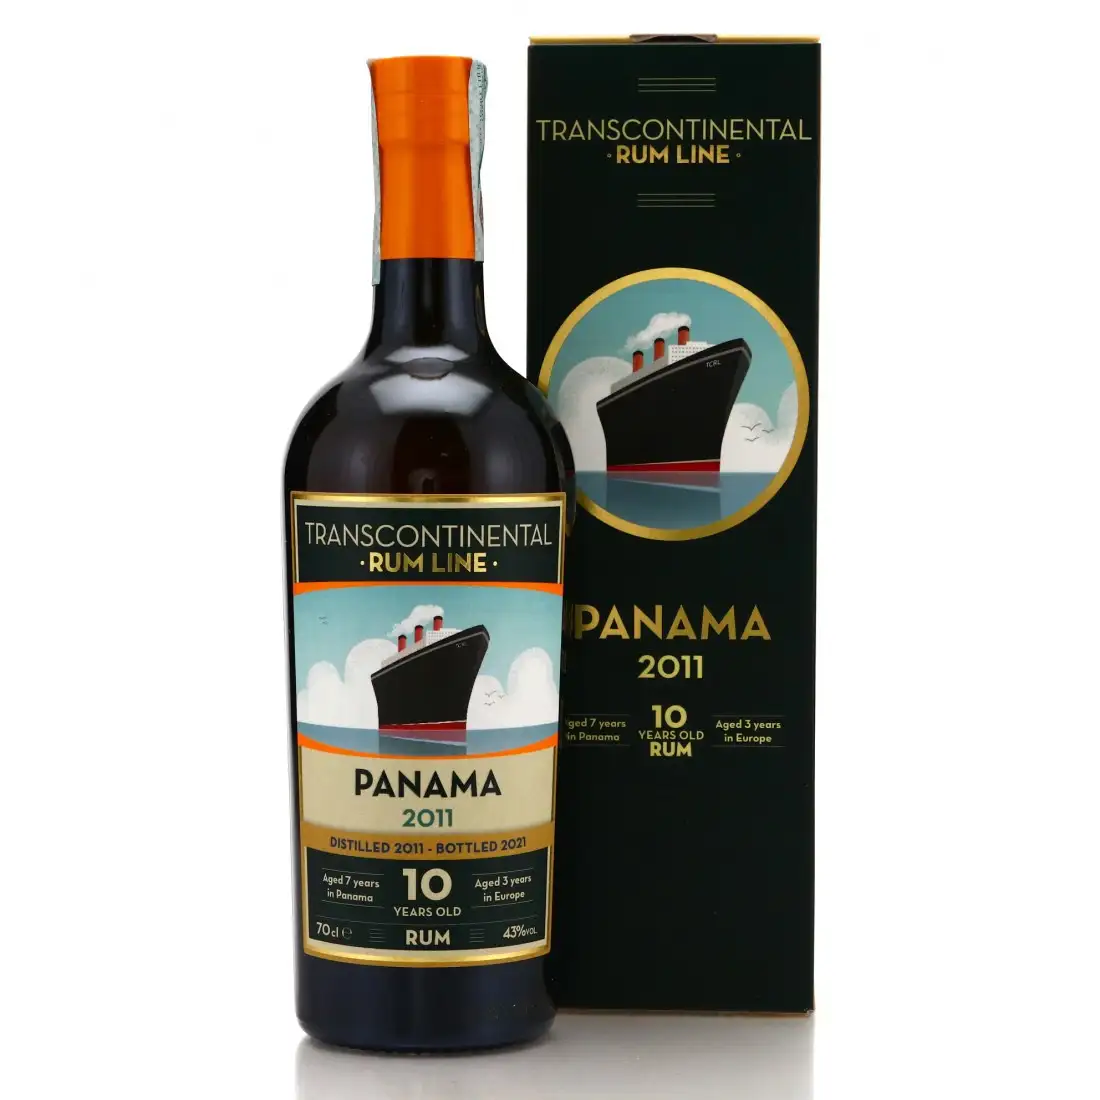 Image of the front of the bottle of the rum Panama (LMDW)